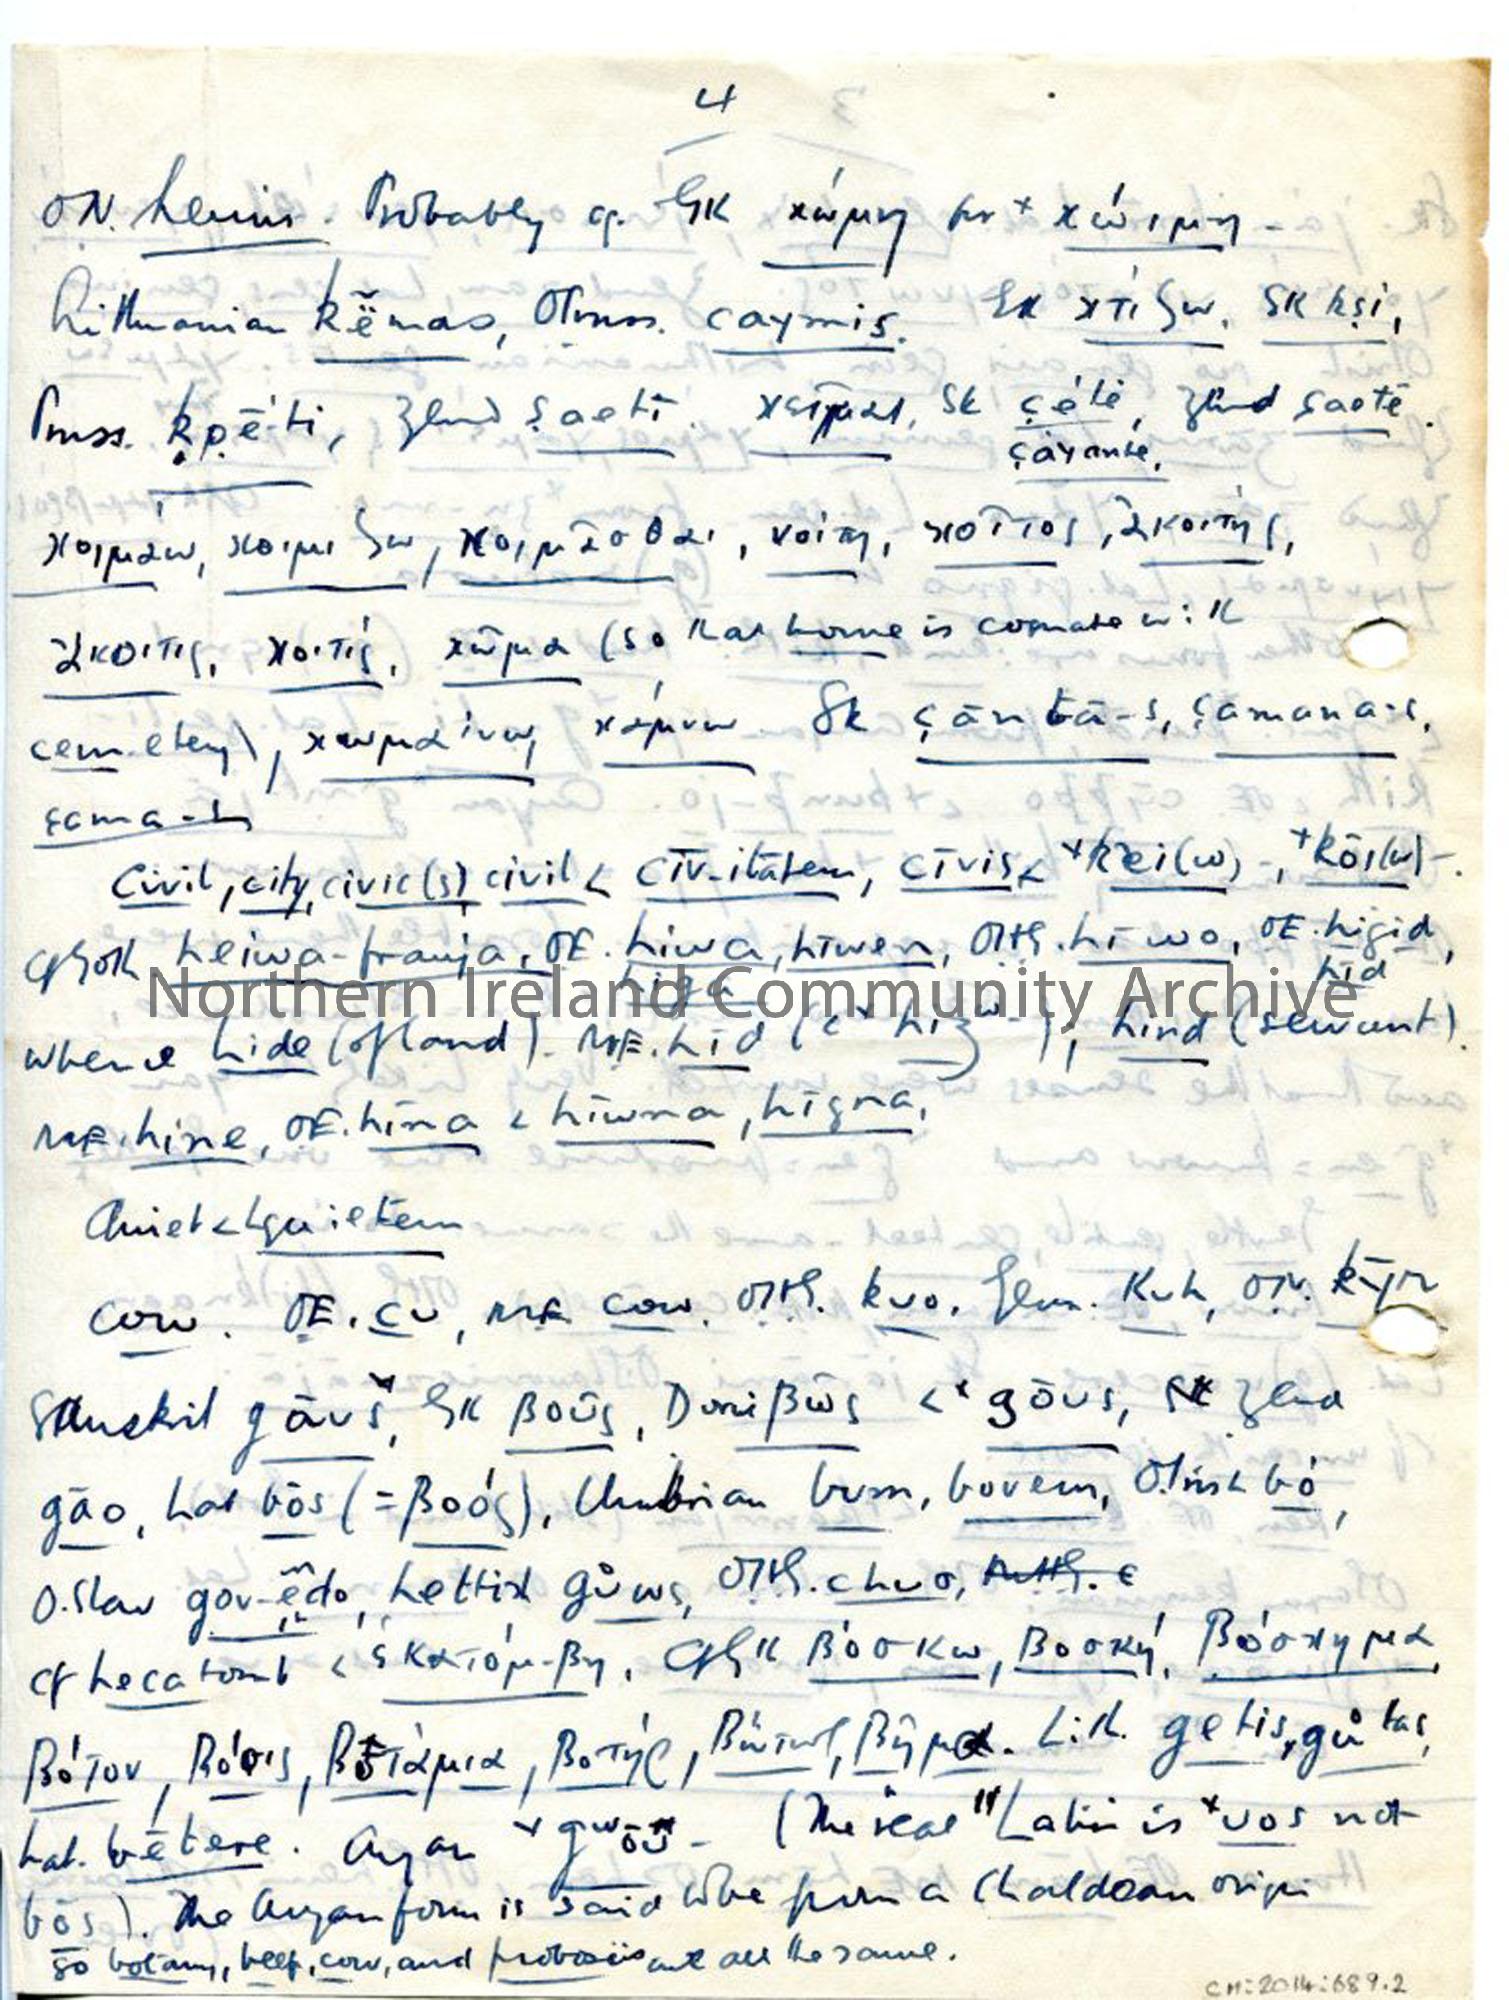 Page 4 of 5, Letter dated 15.9.1942